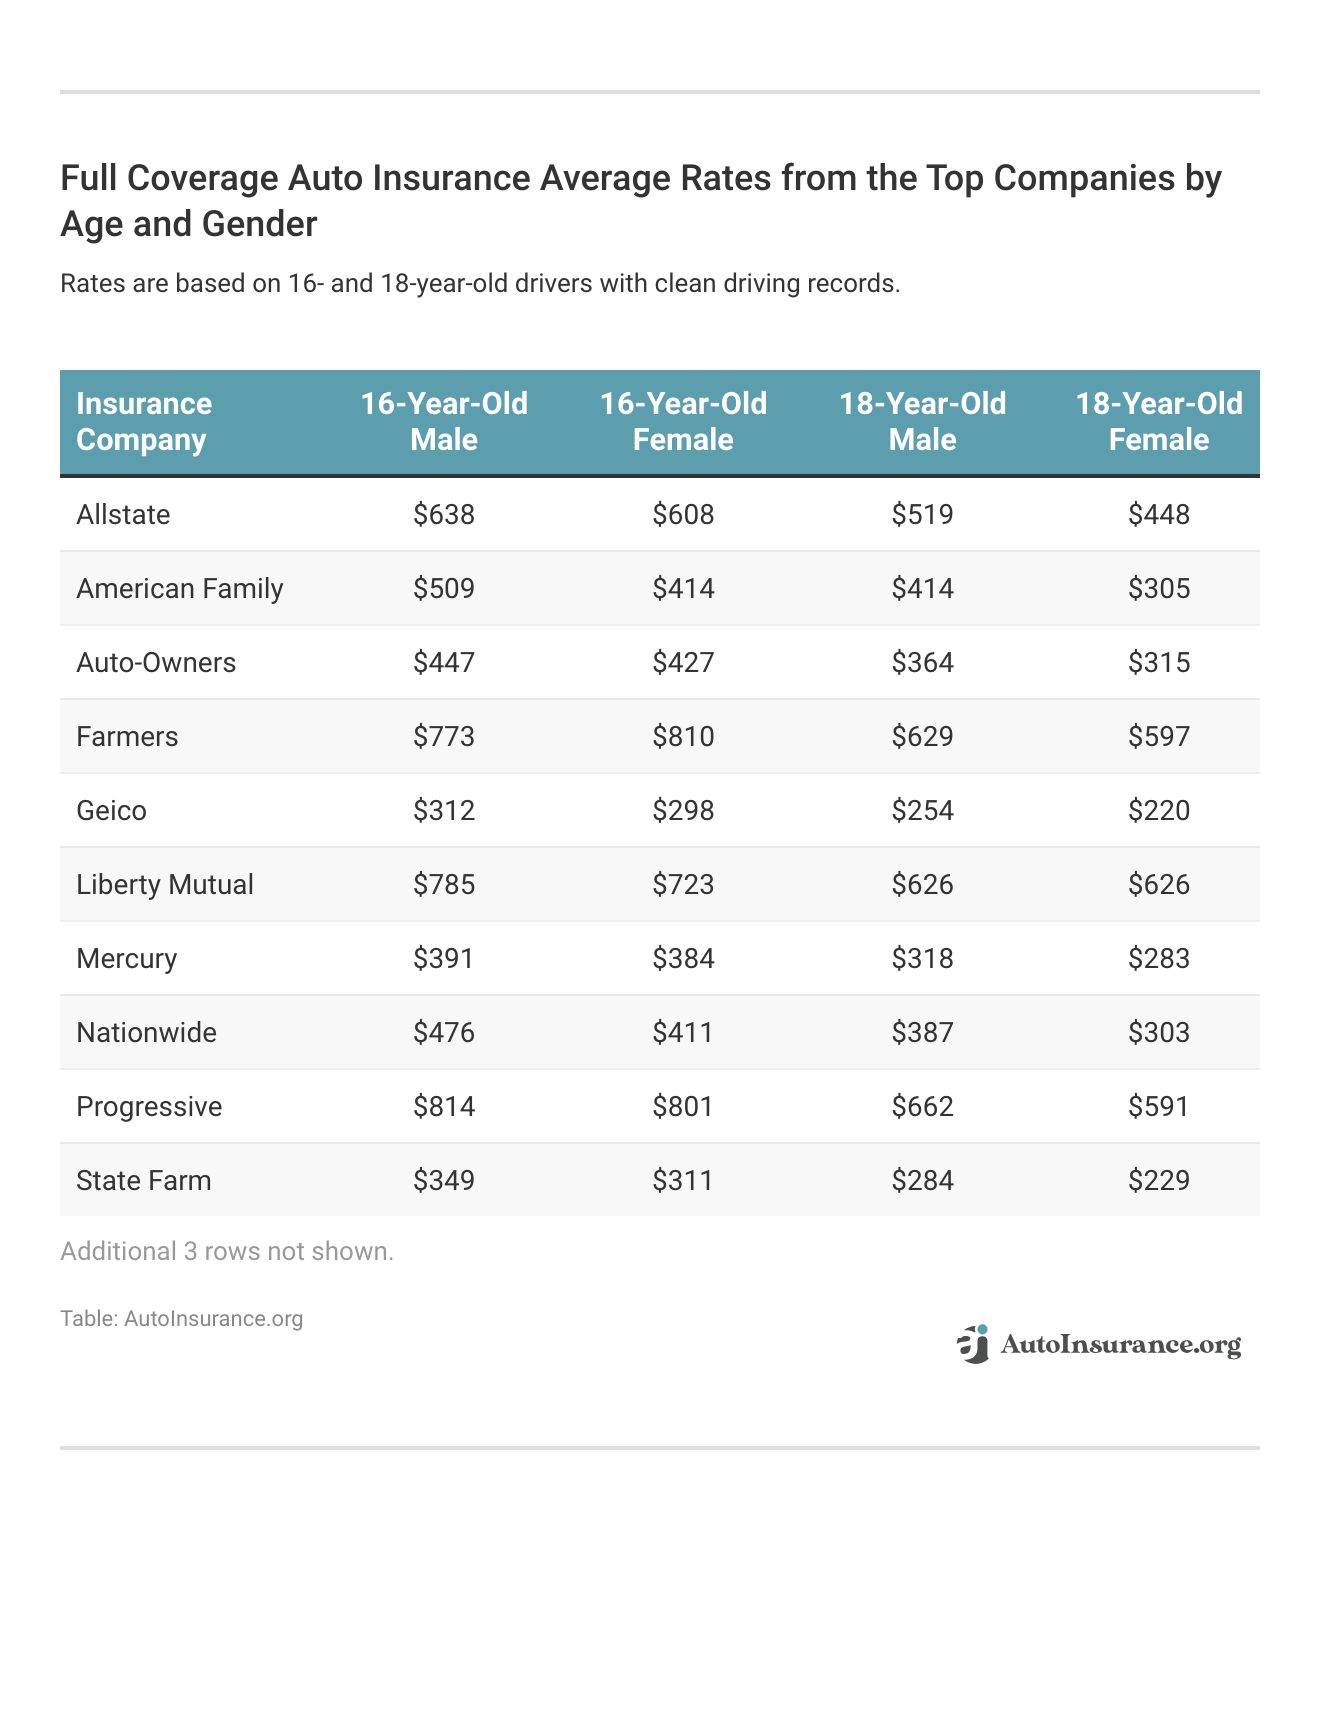 <h3>Full Coverage Auto Insurance Average Rates from the Top Companies by Age and Gender</h3>